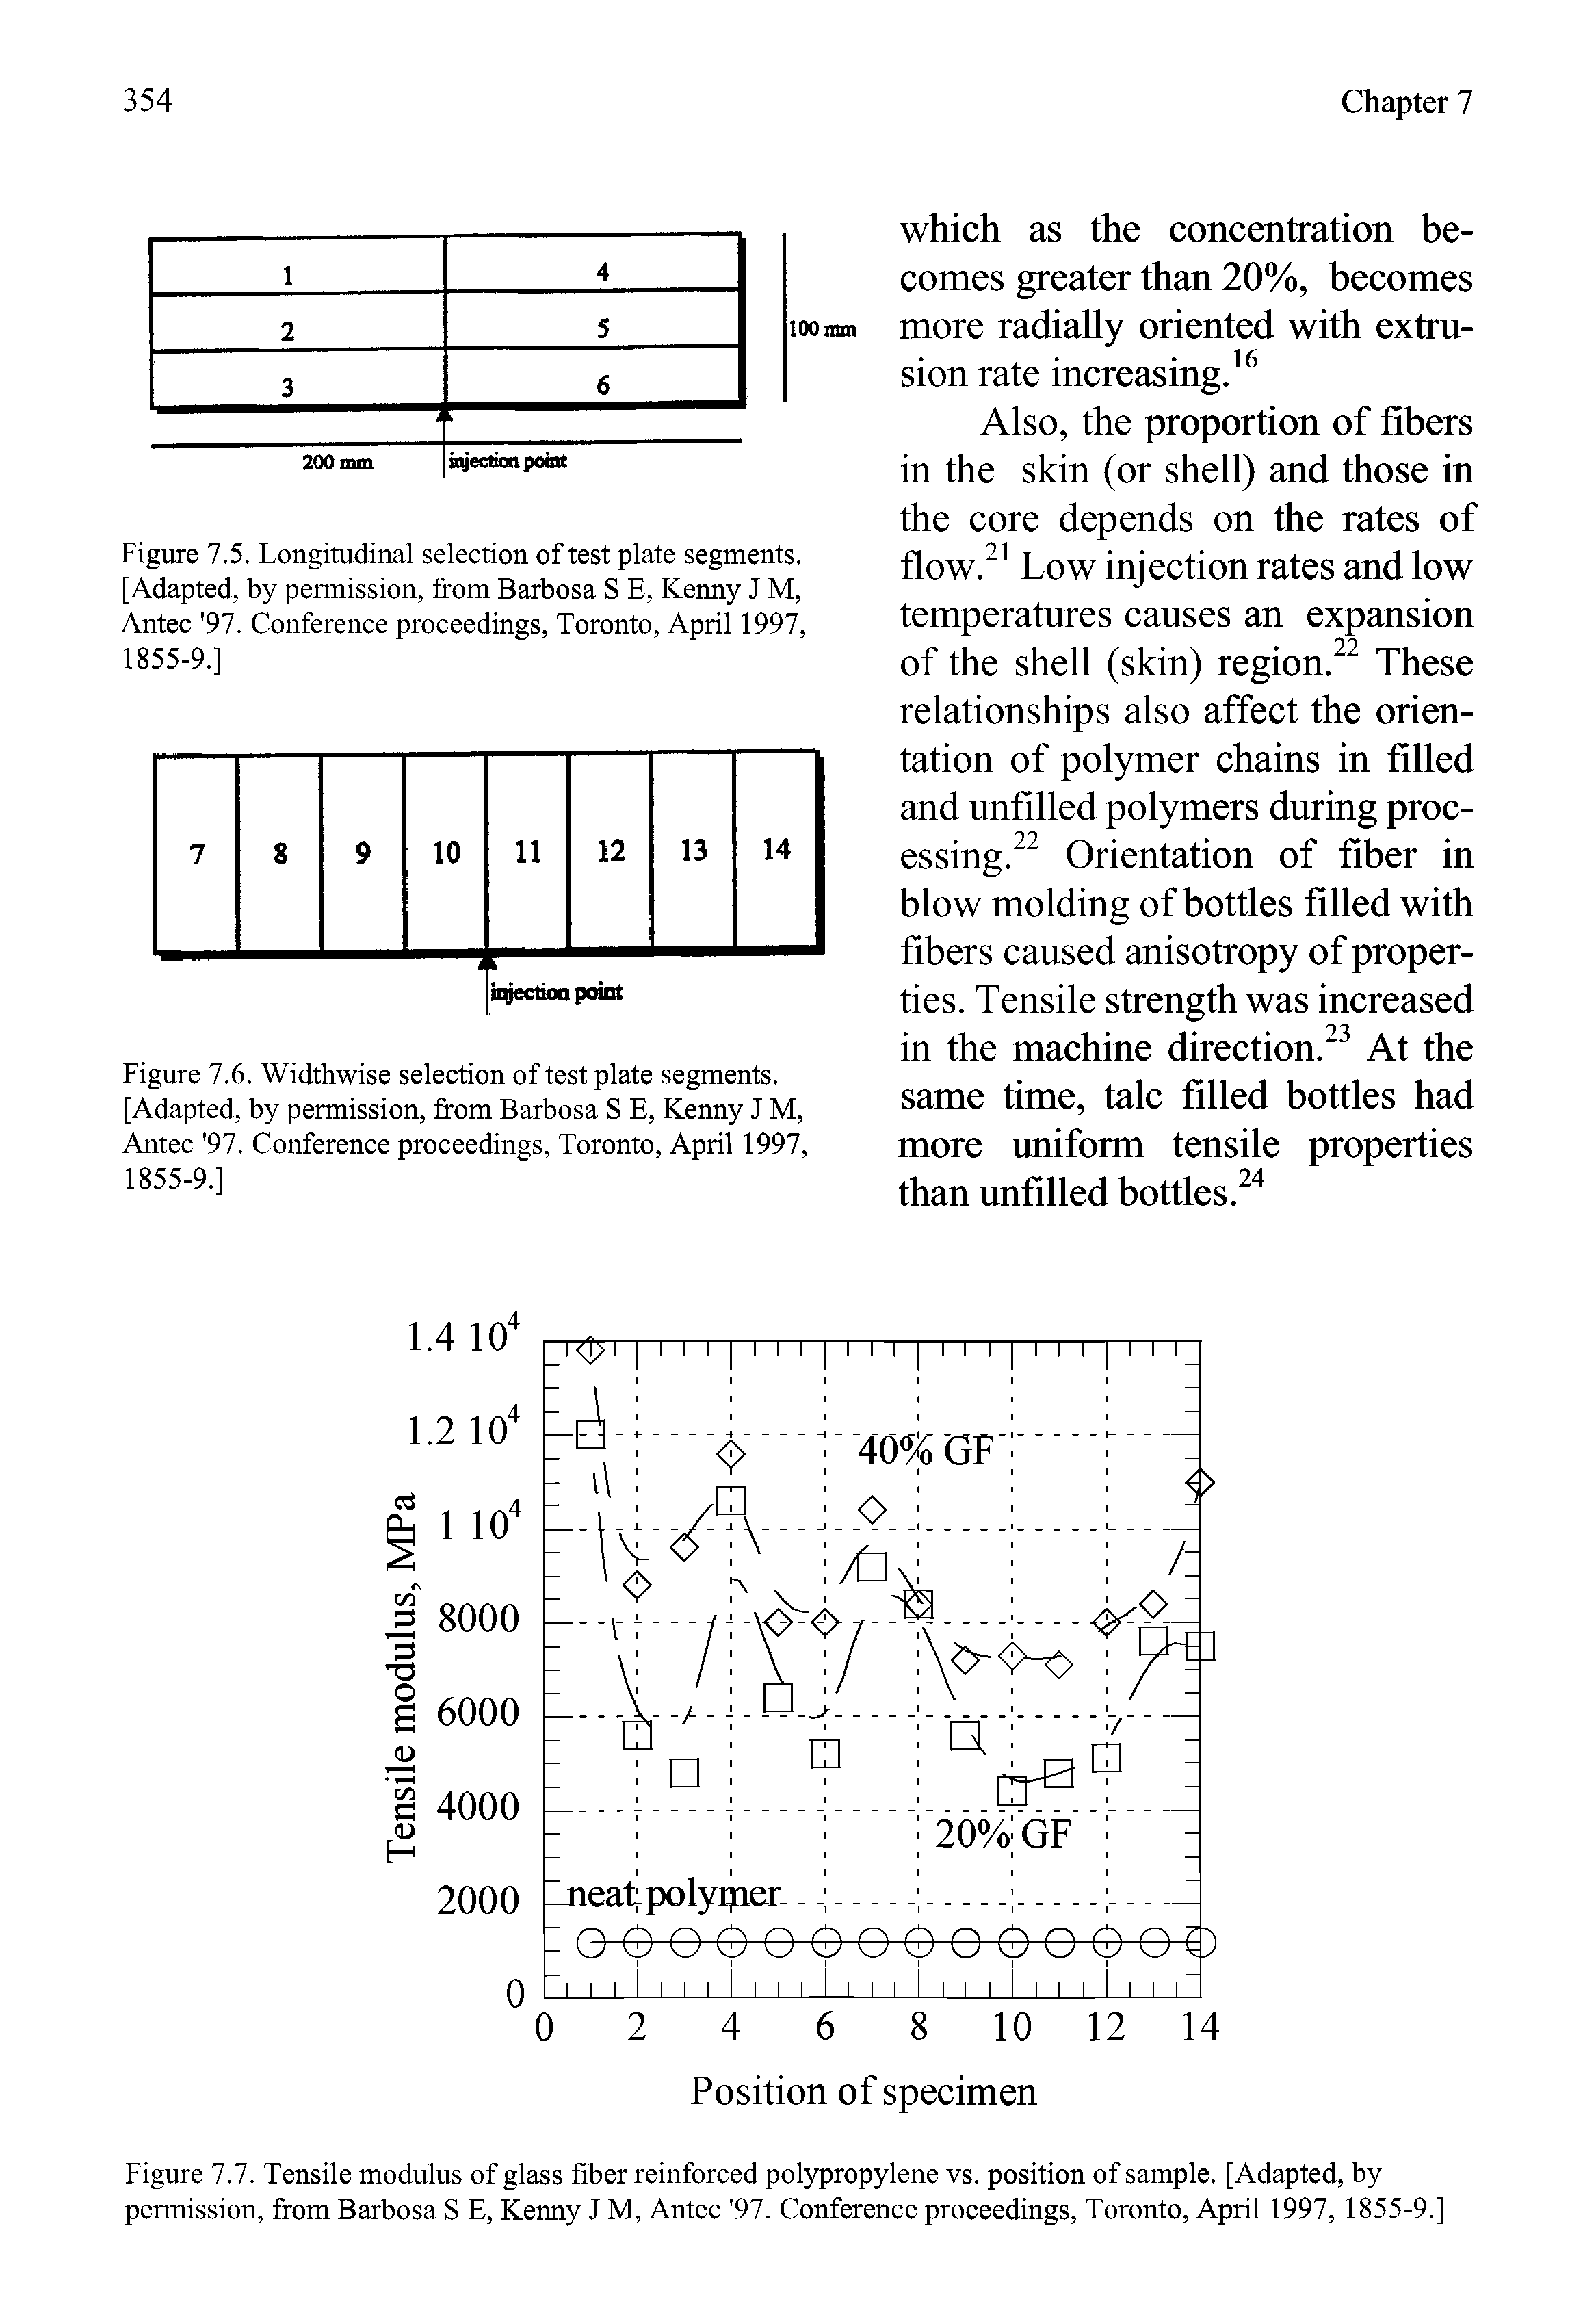 Figure 7.7. Tensile modulus of glass fiber reinforced polypropylene vs. position of sample. [Adapted, by pennission, from Barbosa S E, Kenny J M, Antec 97. Conference proceedings, Toronto, April 1997, 1855-9.]...